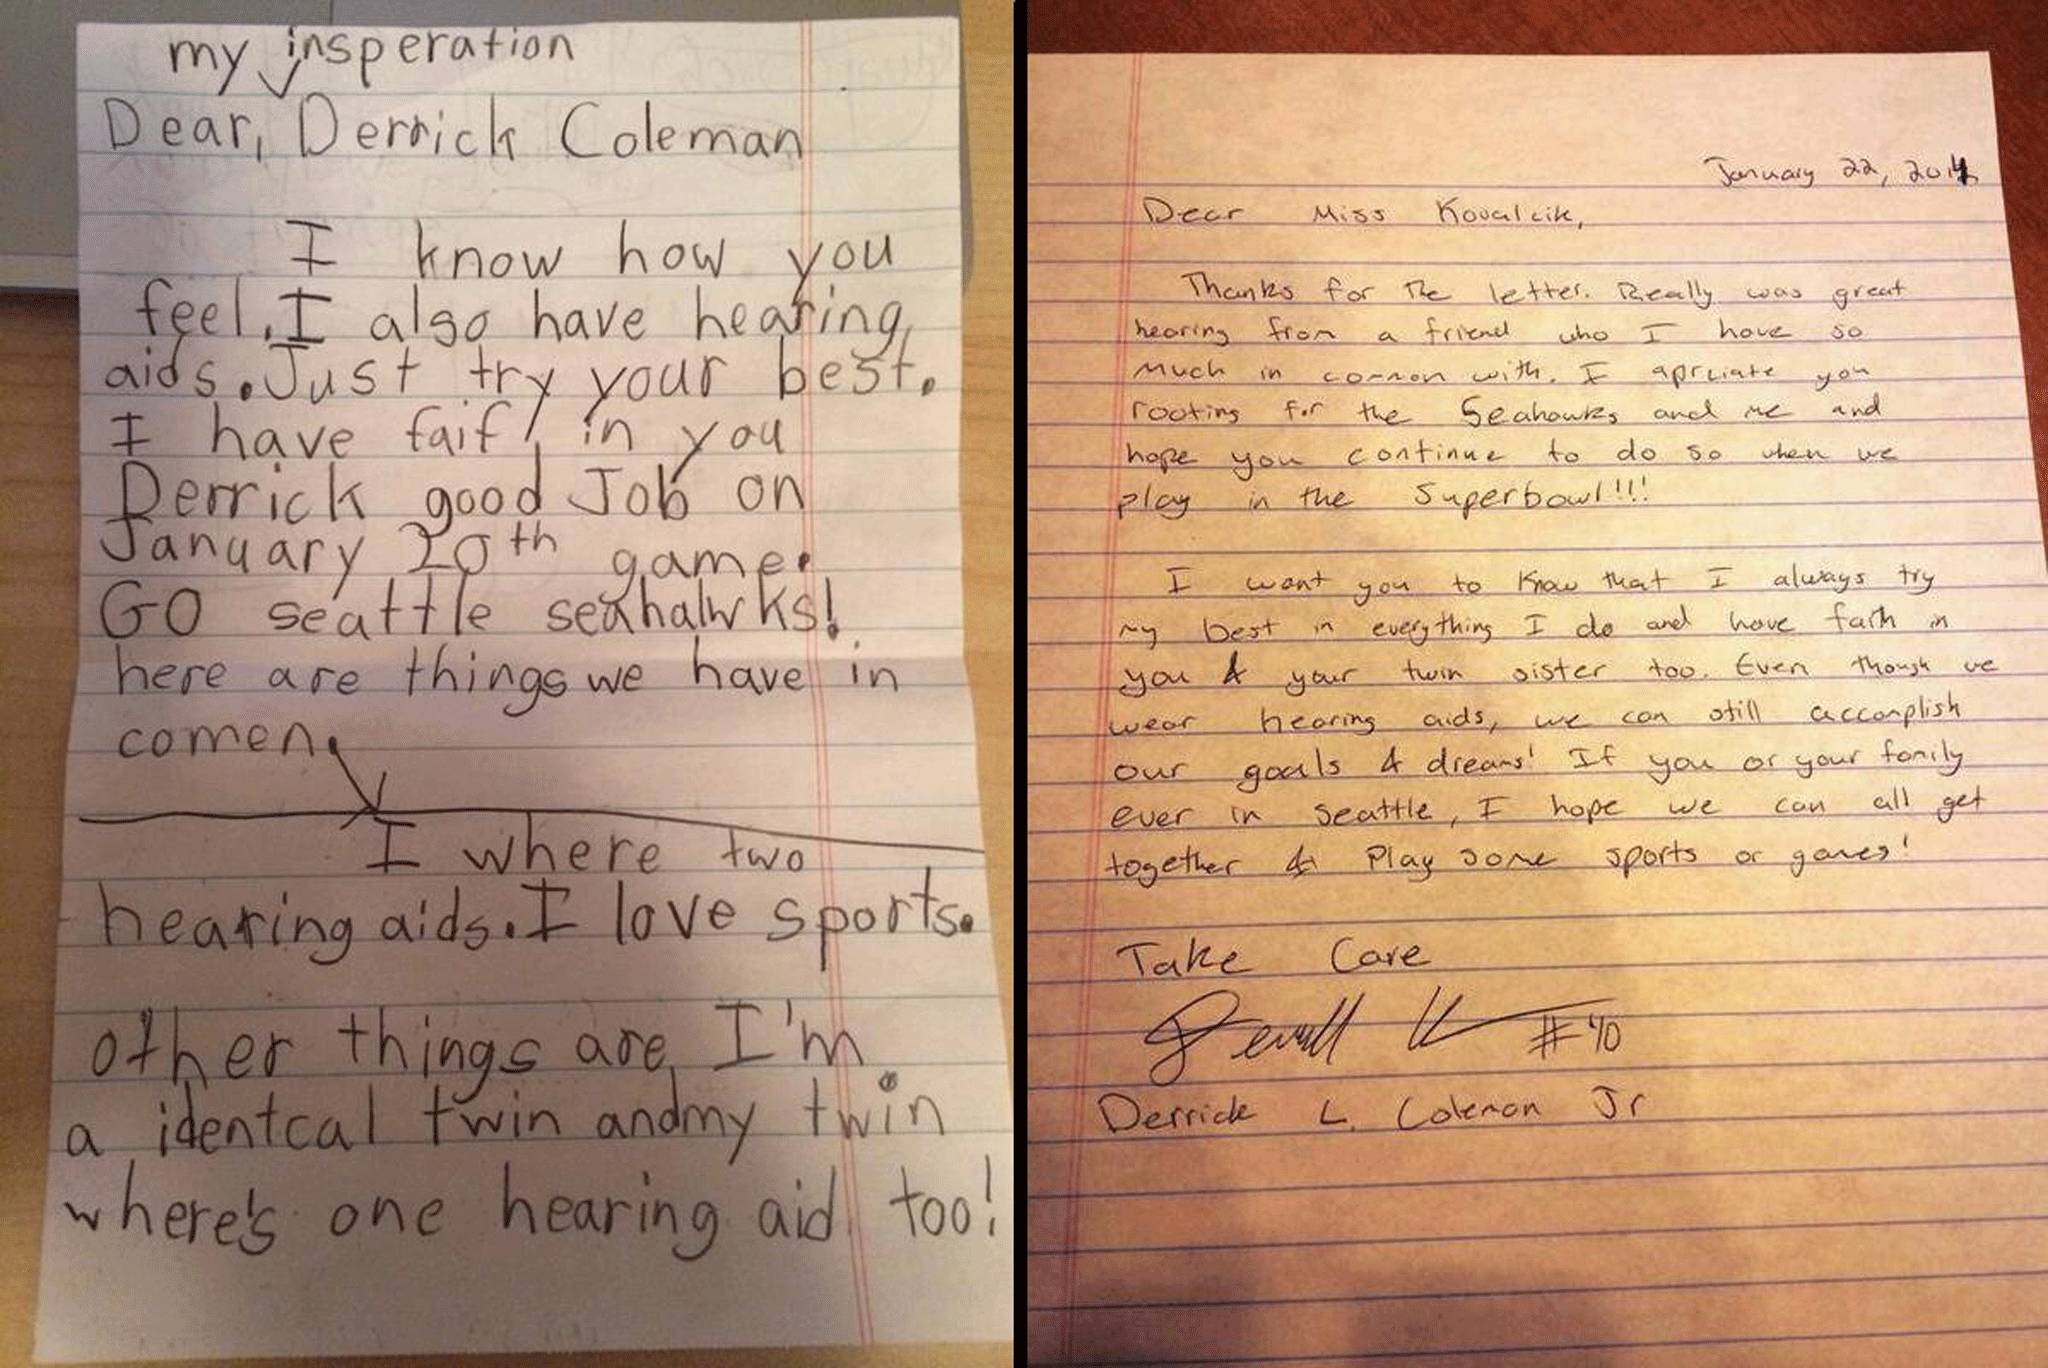 The girl's dad tweeted the letter to Coleman